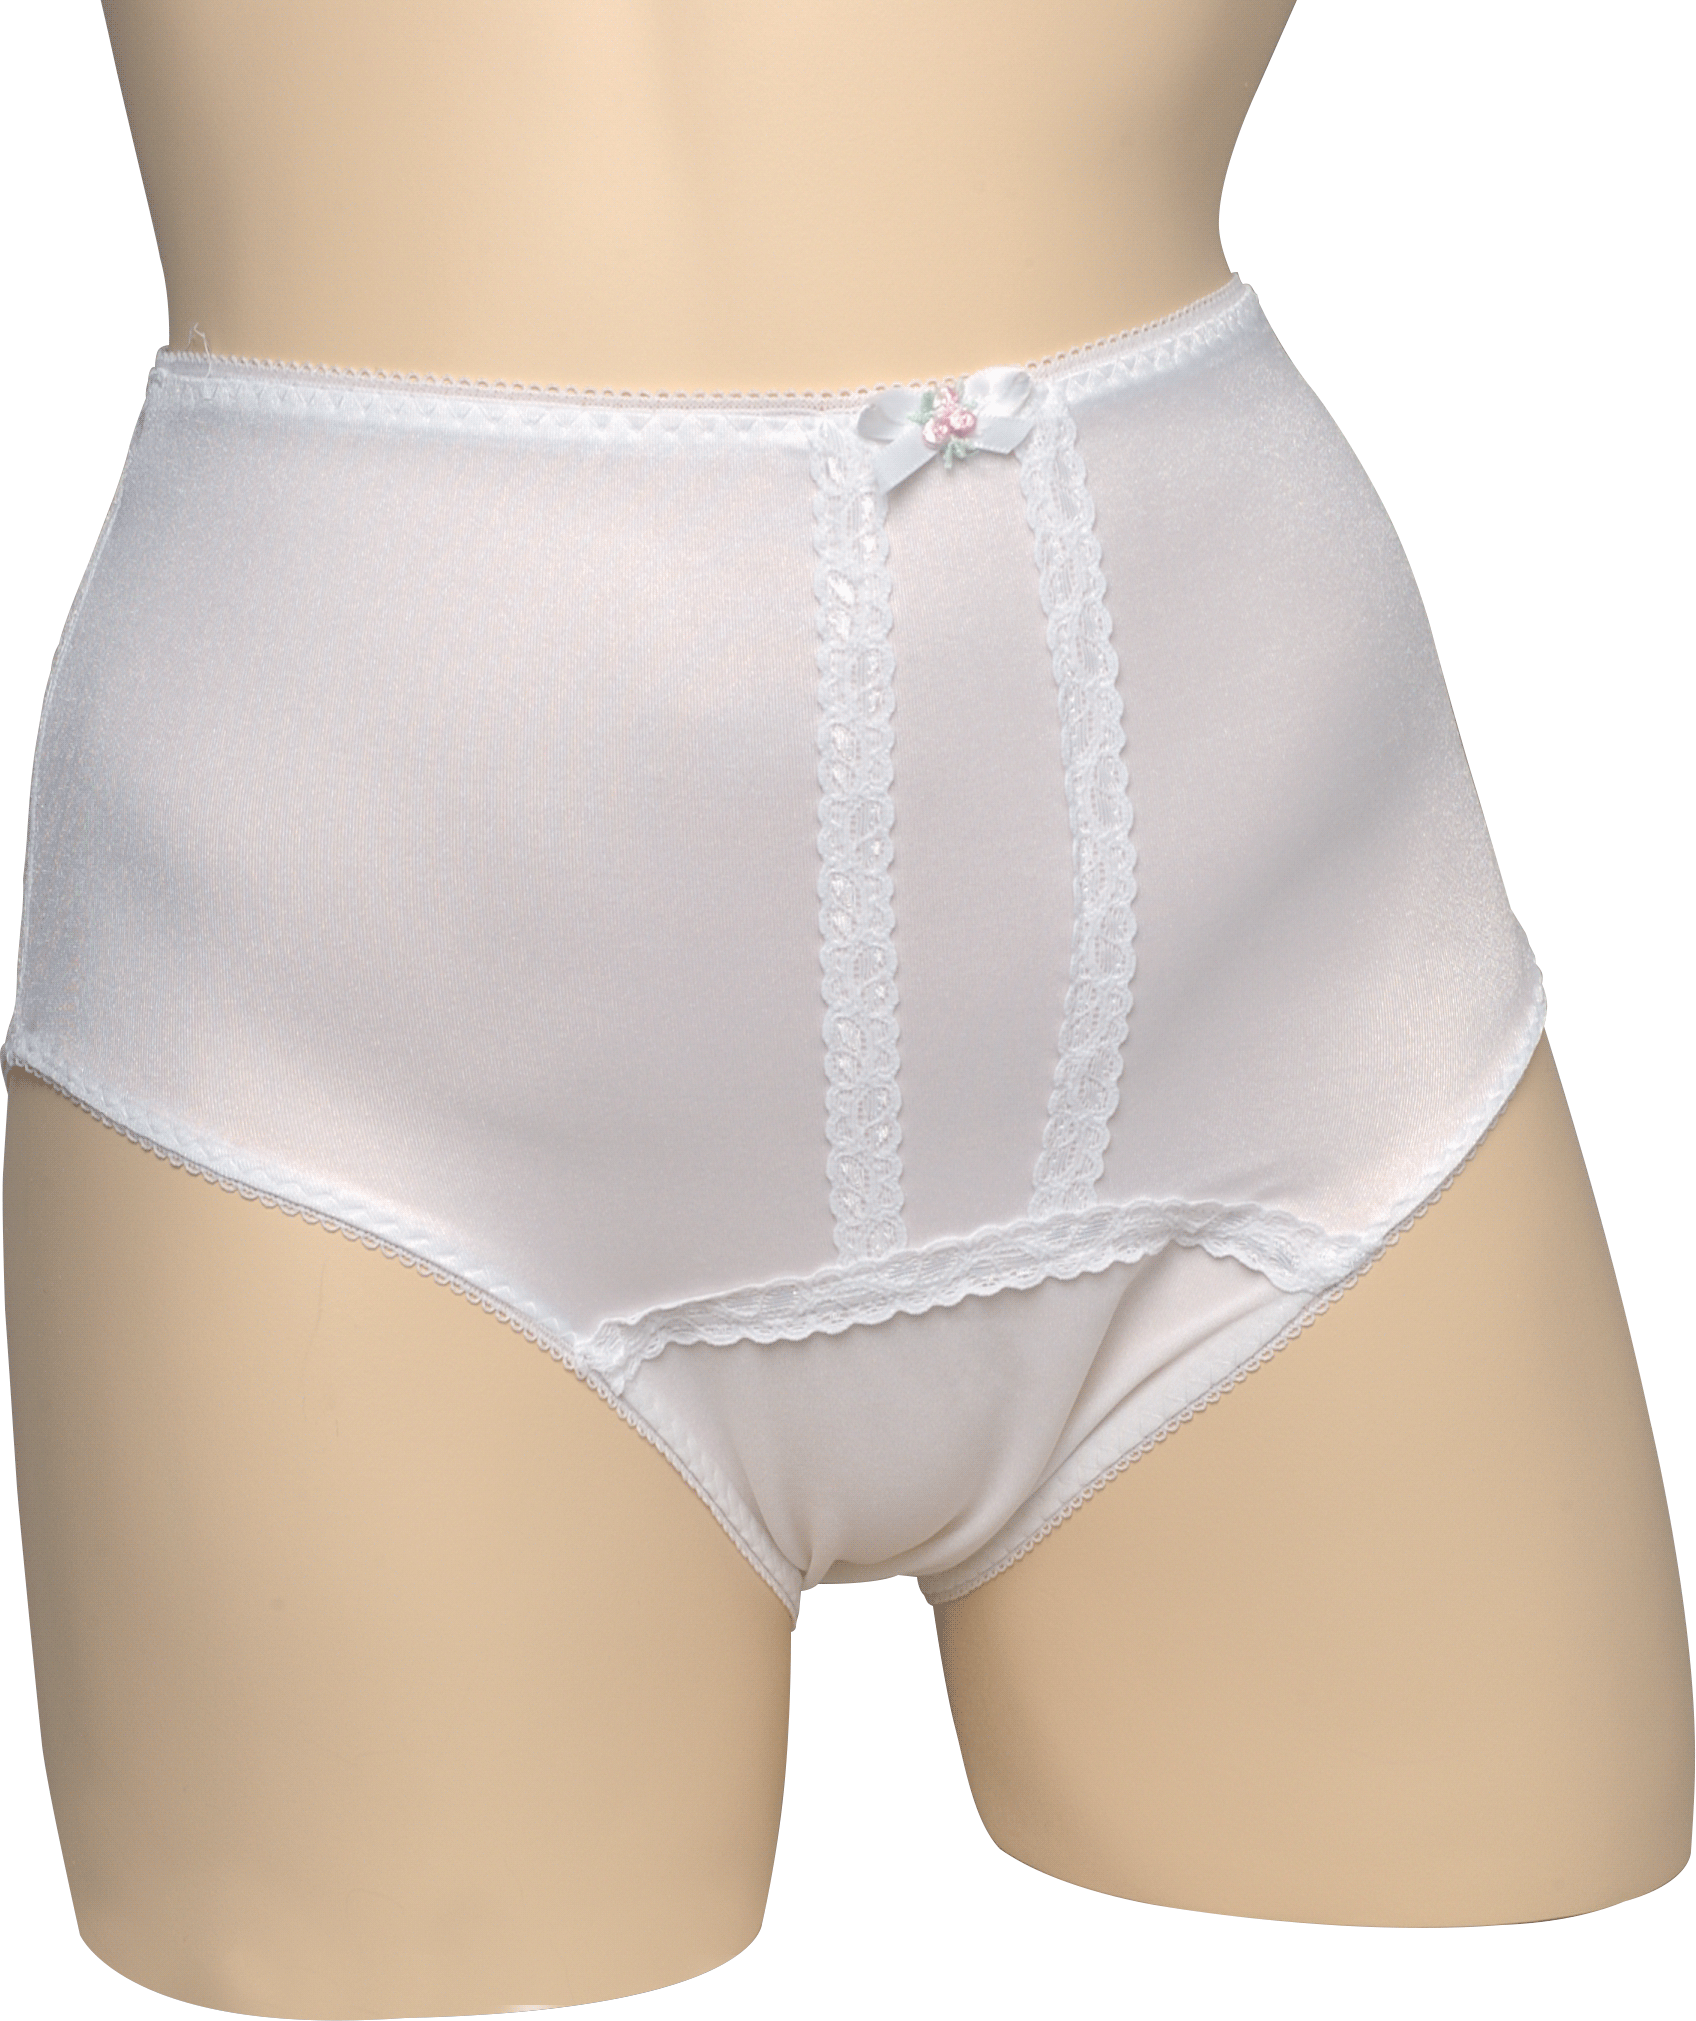 CareFor Ultra Ladies Panties with Haloshield Odor Control, X-Large 40" - 48"